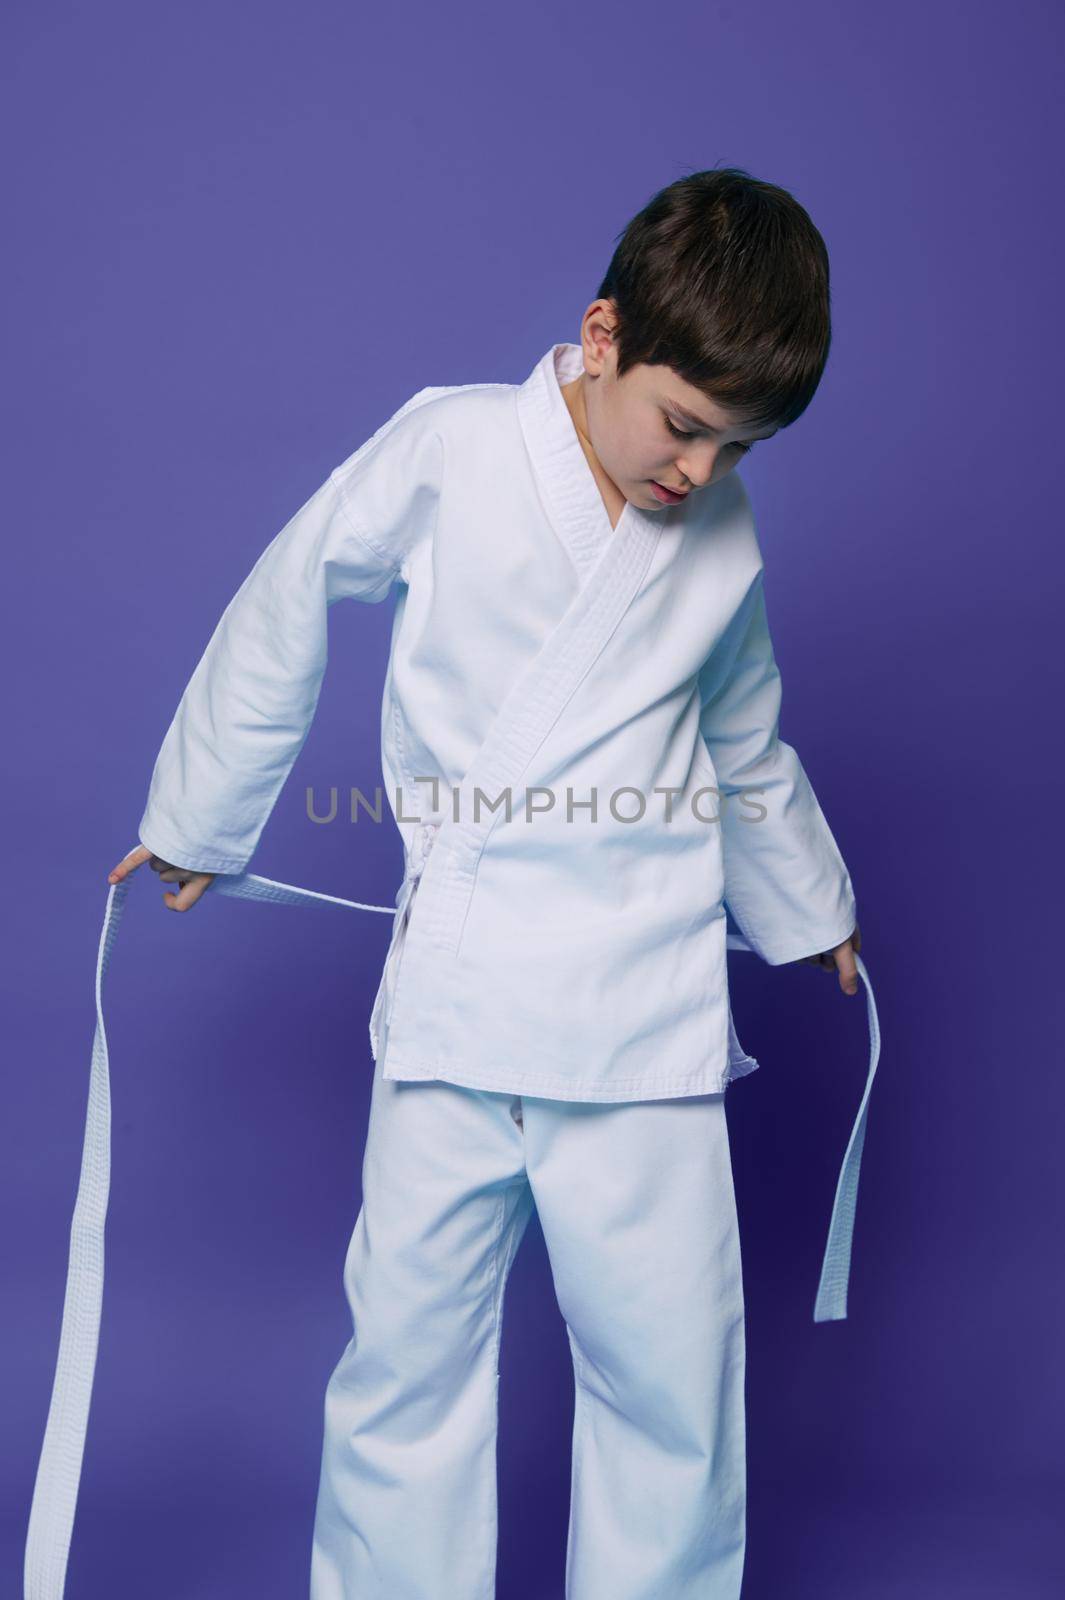 Handsome child, Caucasian teenage boy, aikido wrestler putting on white kimono isolated on purple background with copy space for advertising text. Oriental martial art combat